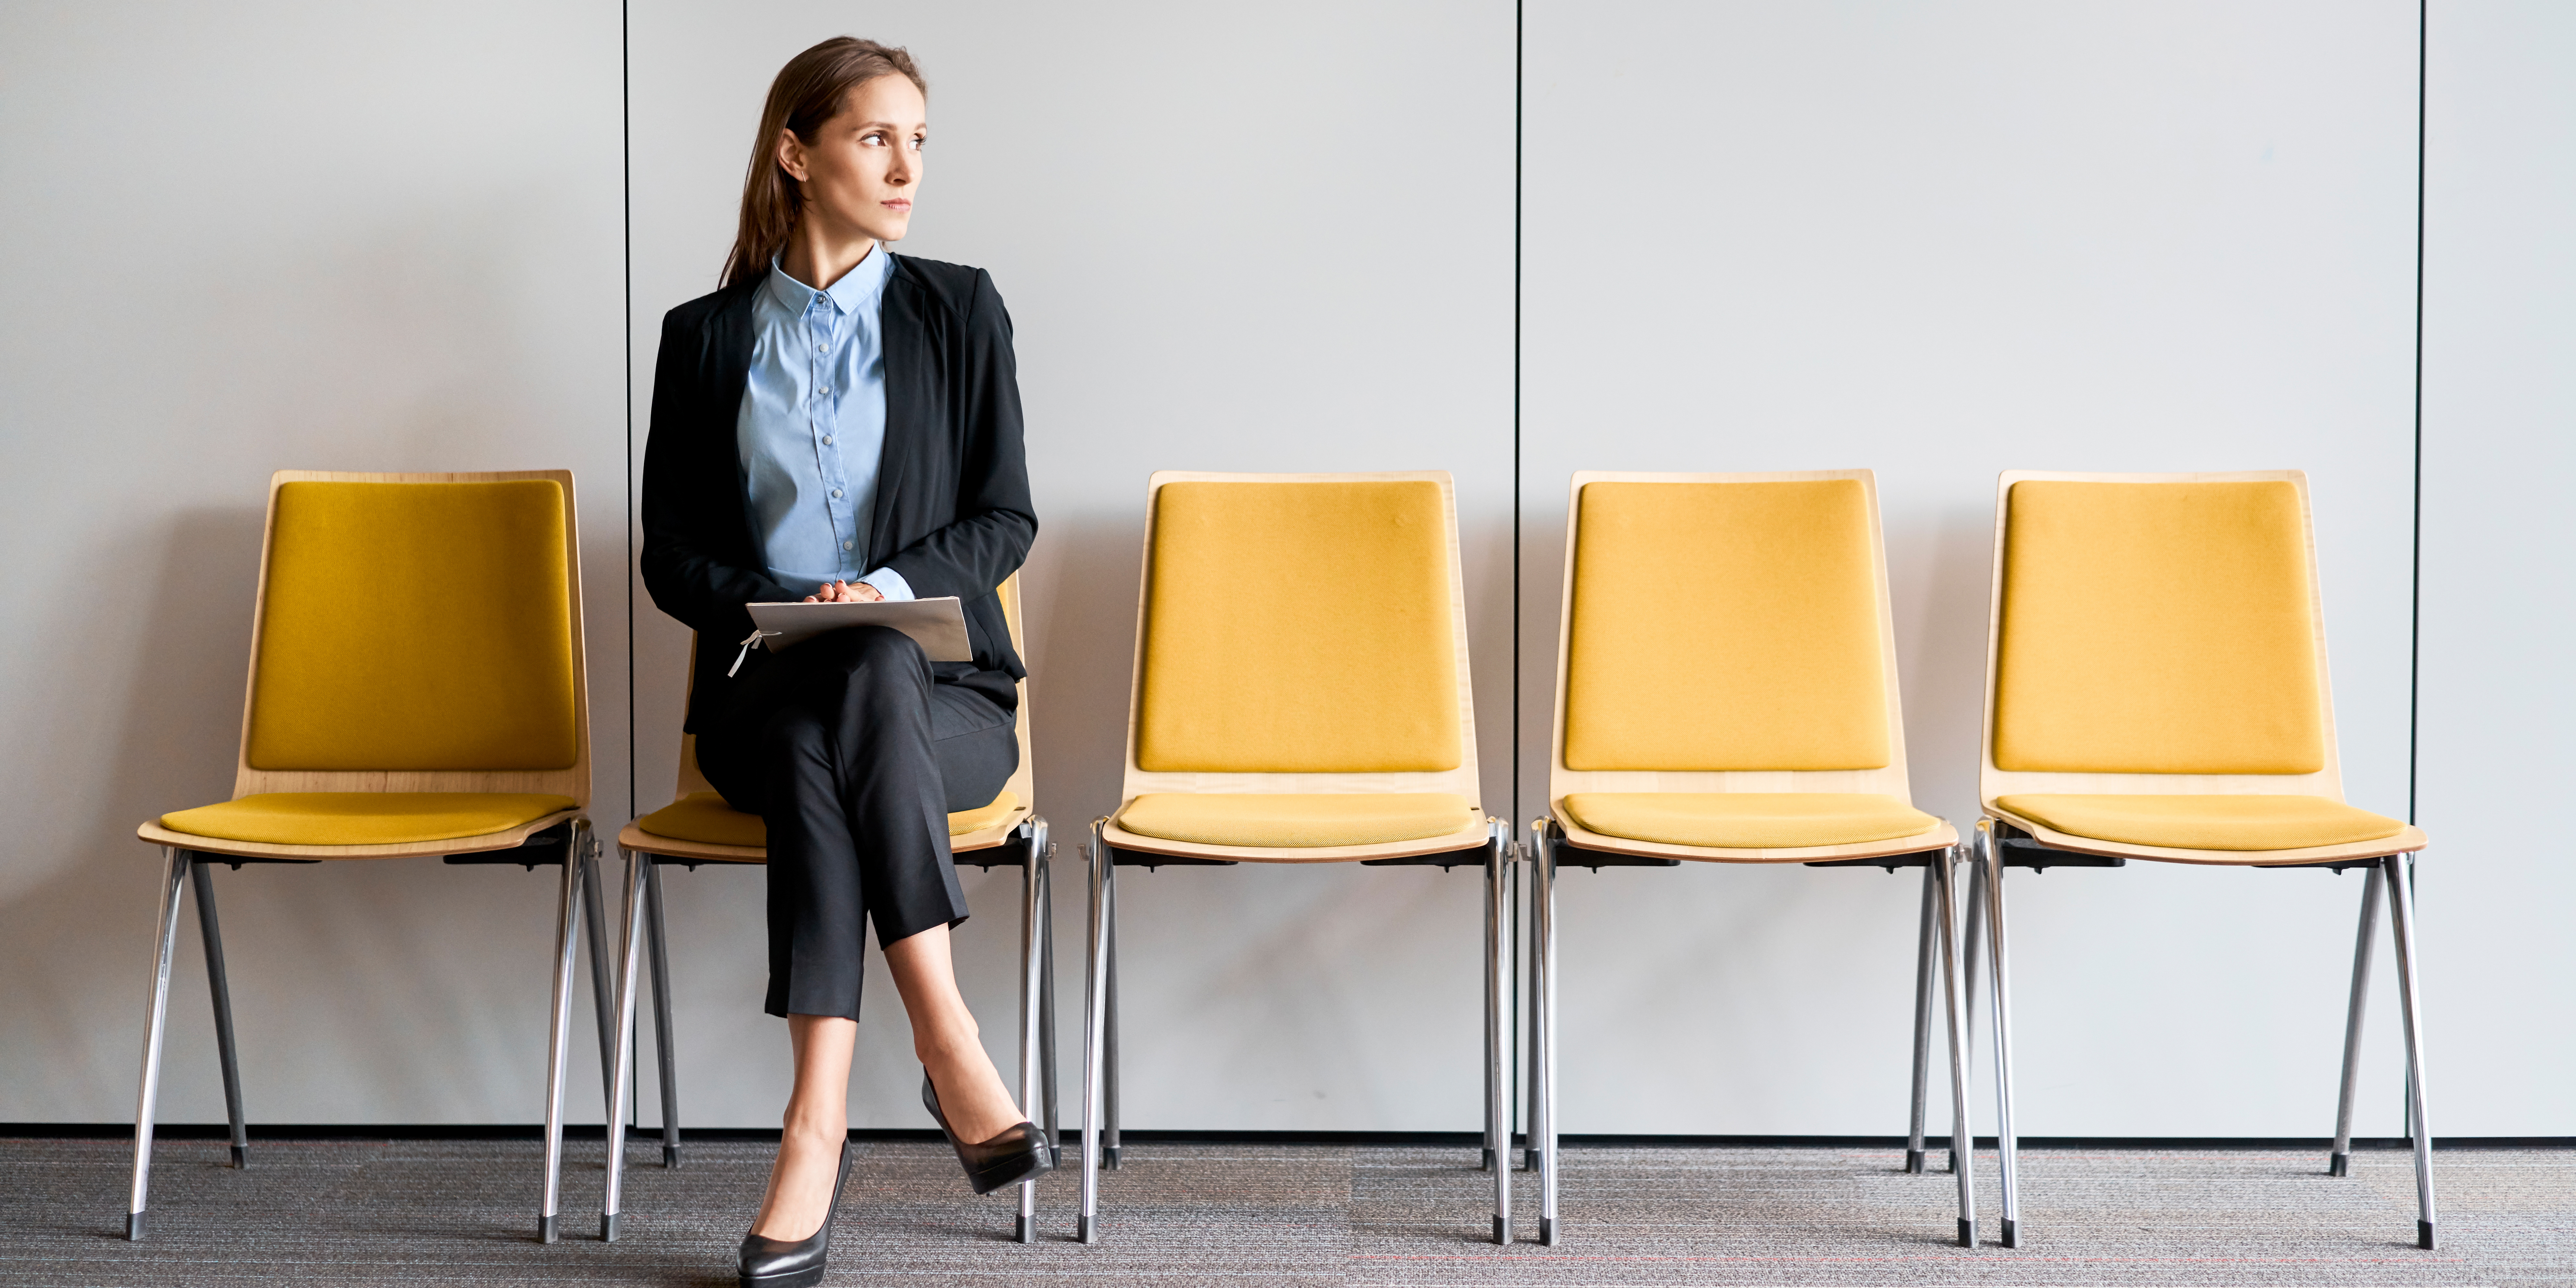 Woman waiting for job interview